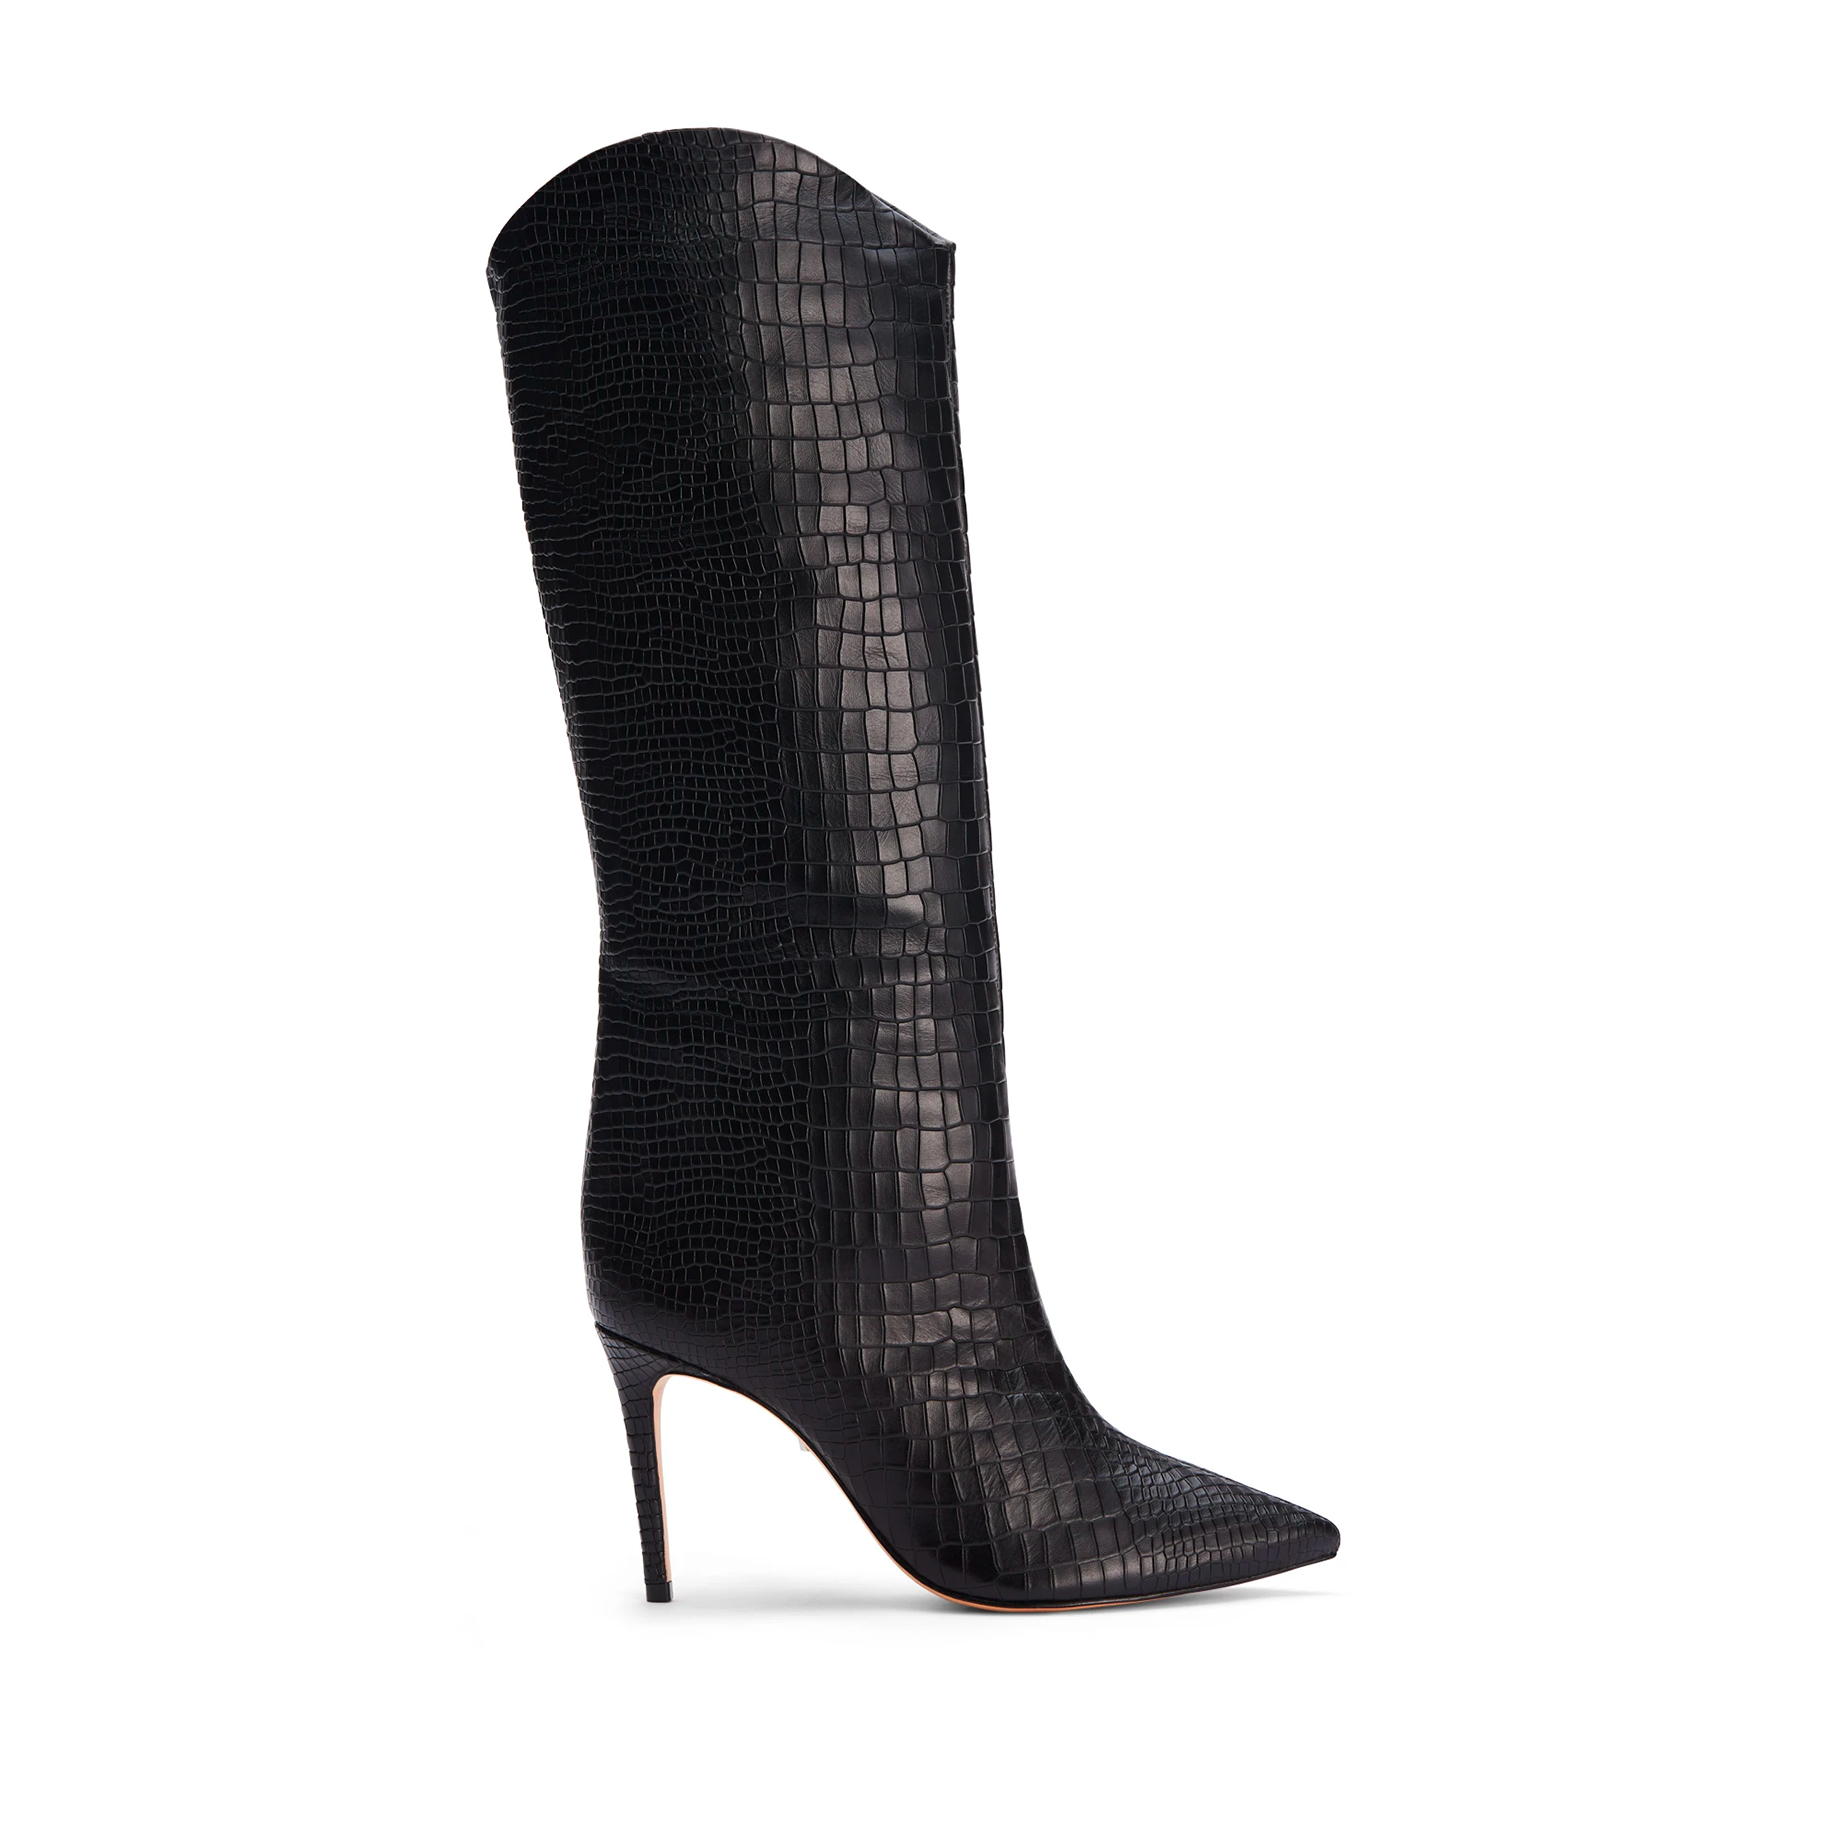 Maryana Boot in high-shine patent leather! | Schutz Shoes